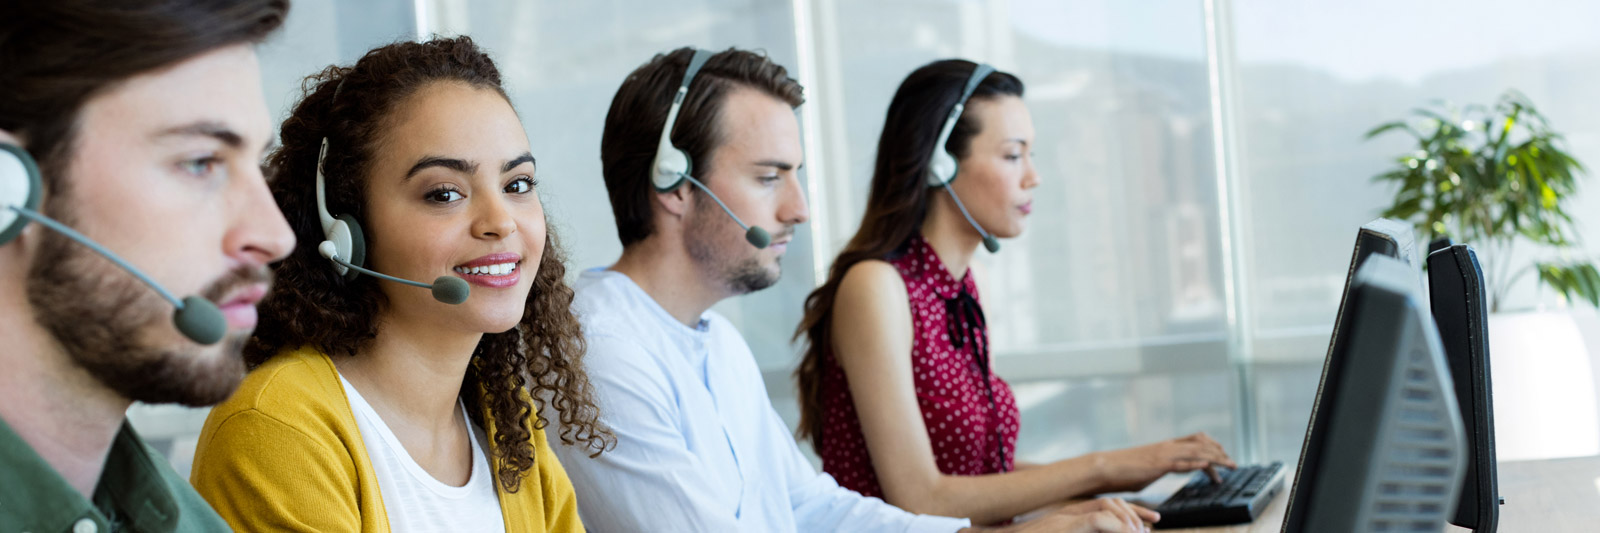 a group of young customer service representatives with headsets